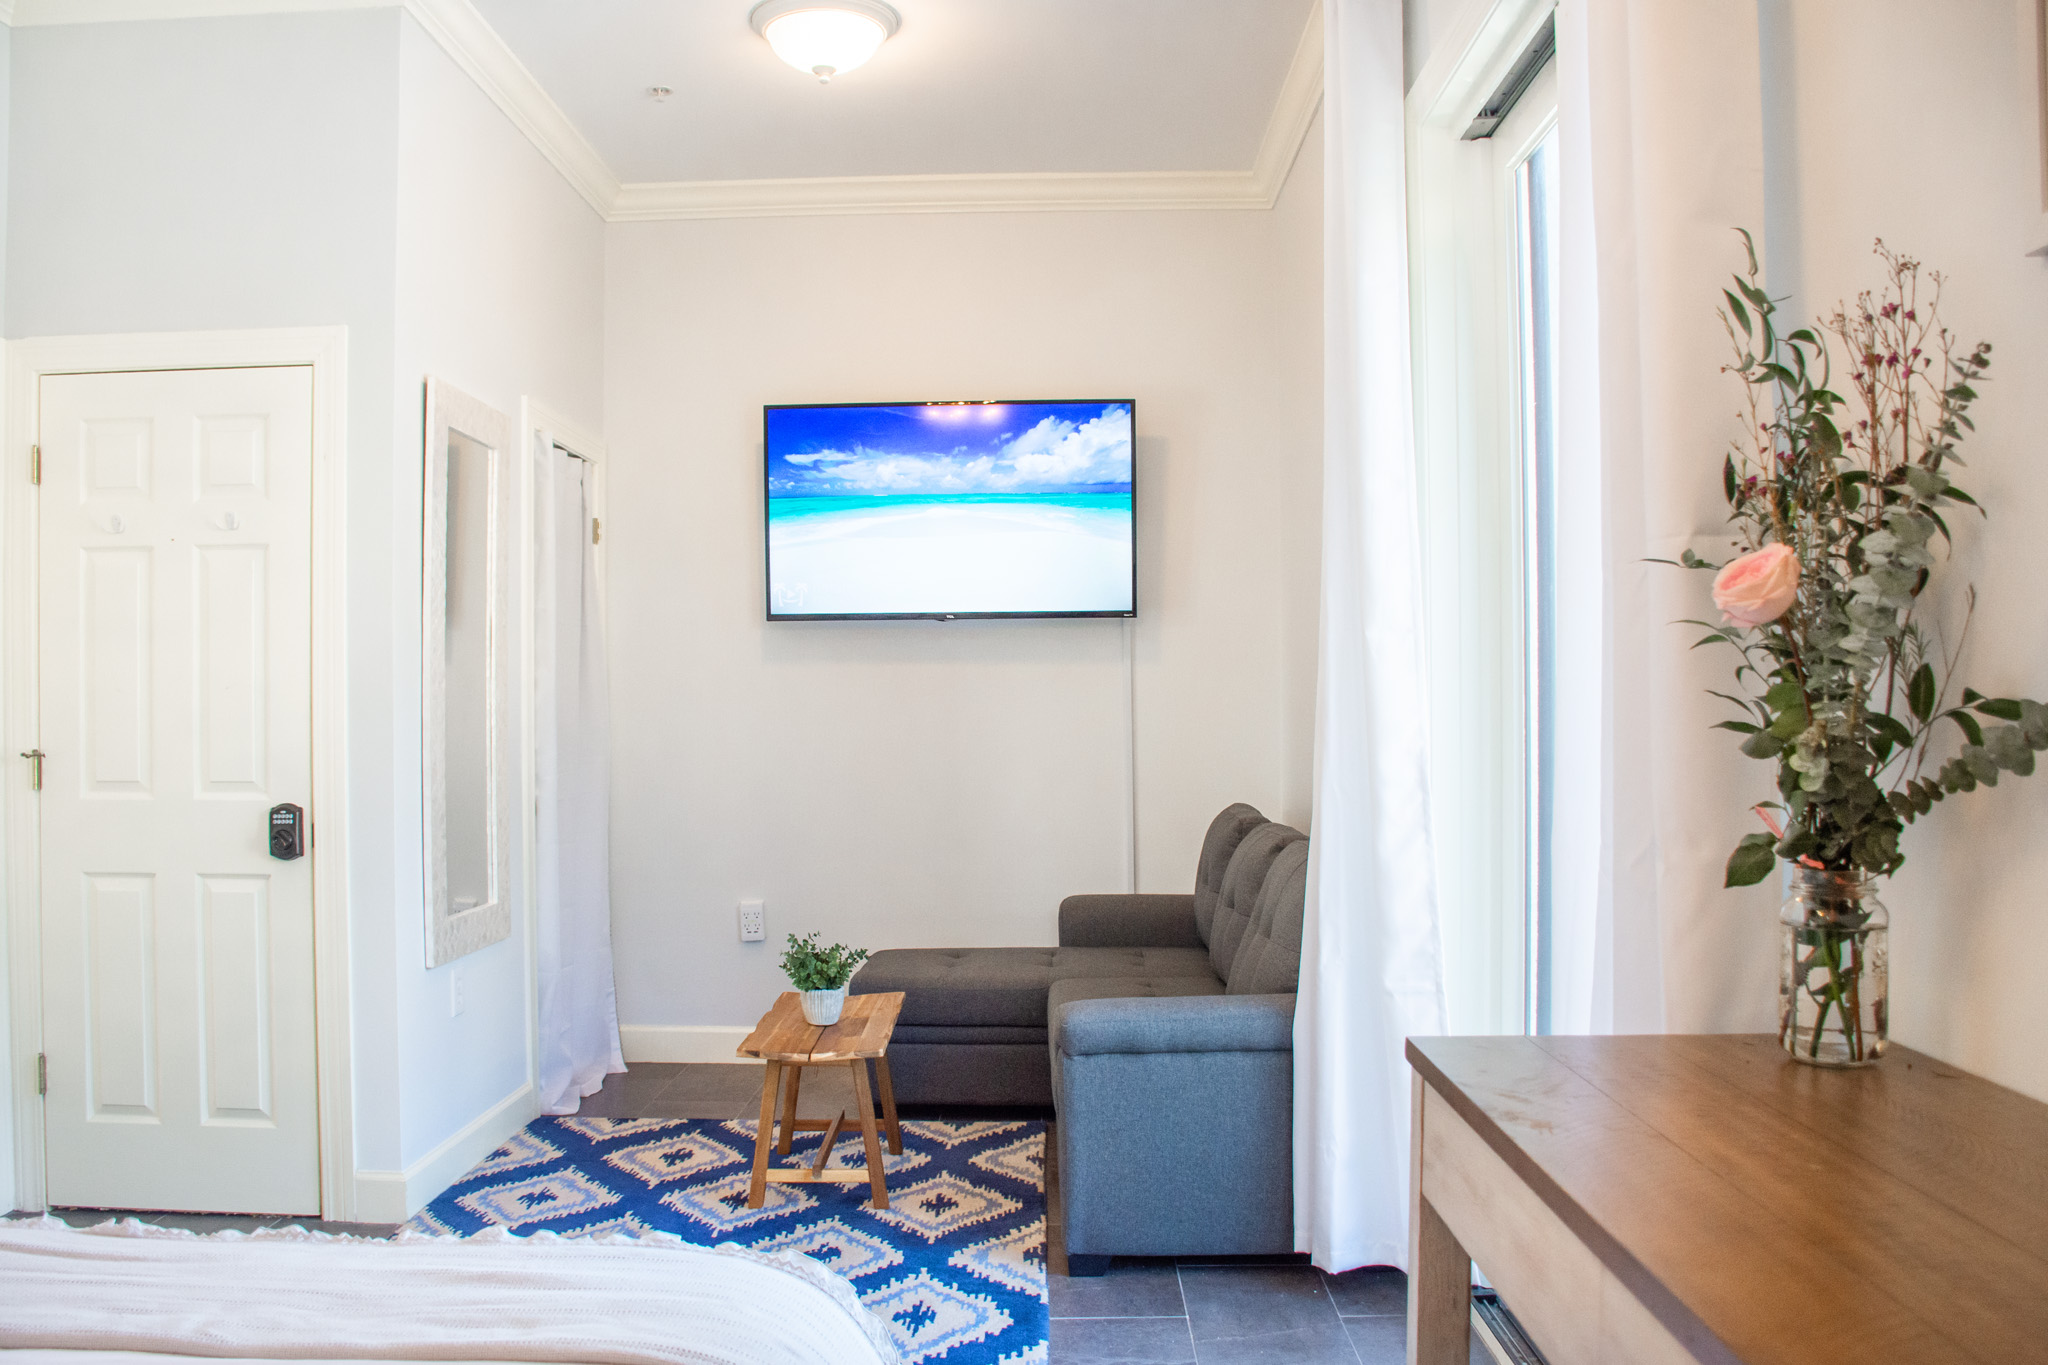 roku tv for airbnb